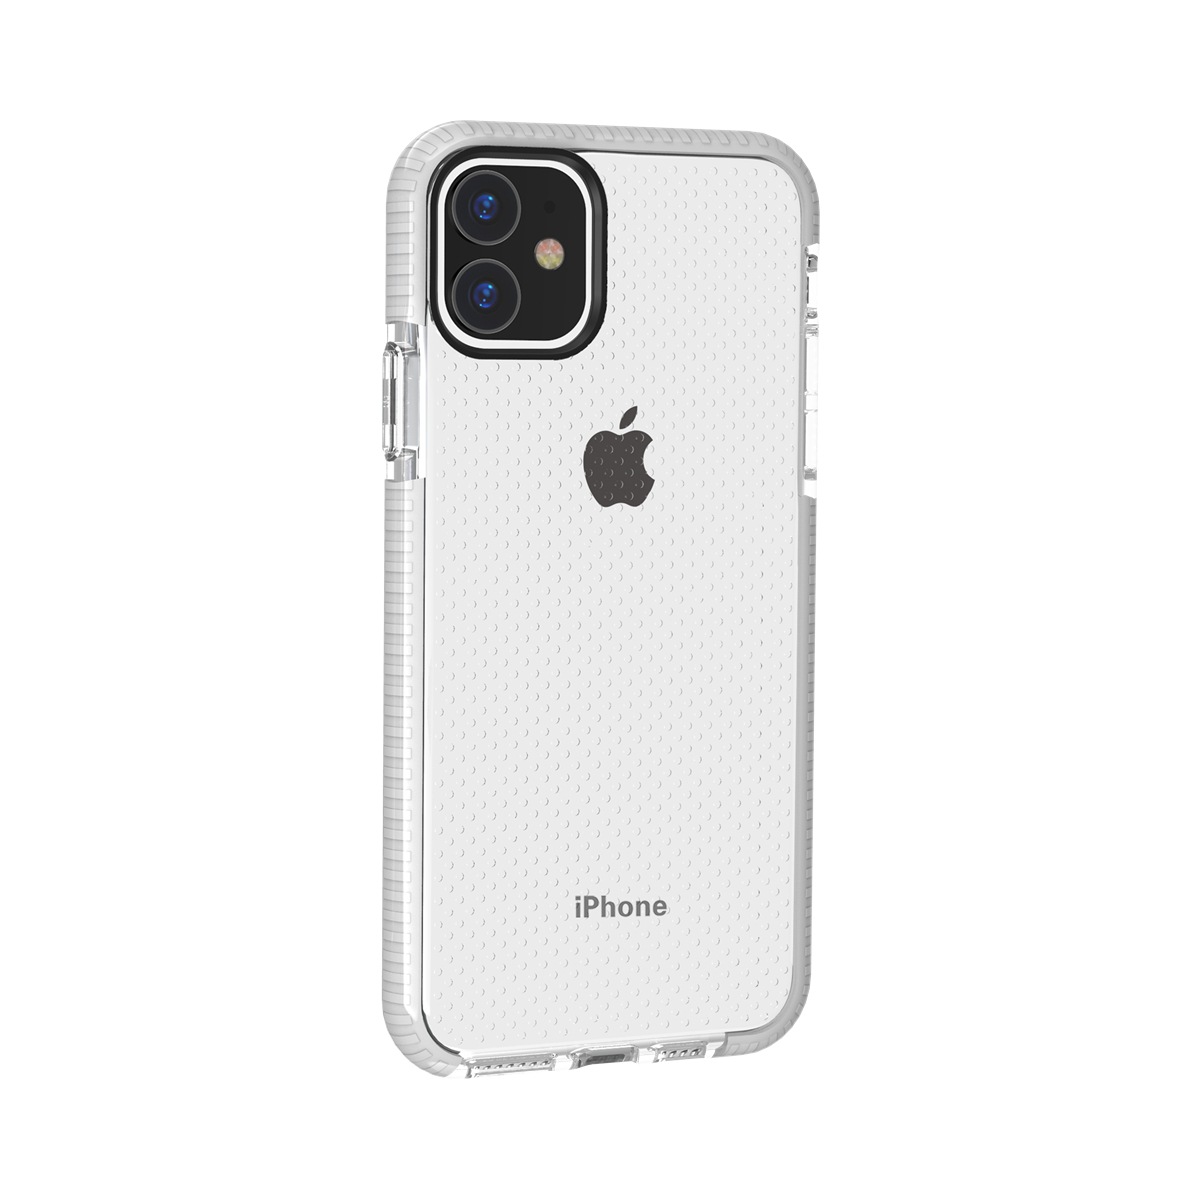 iPHONE 11 Pro Max (6.5in) Mesh Armor Hybrid Case (White)